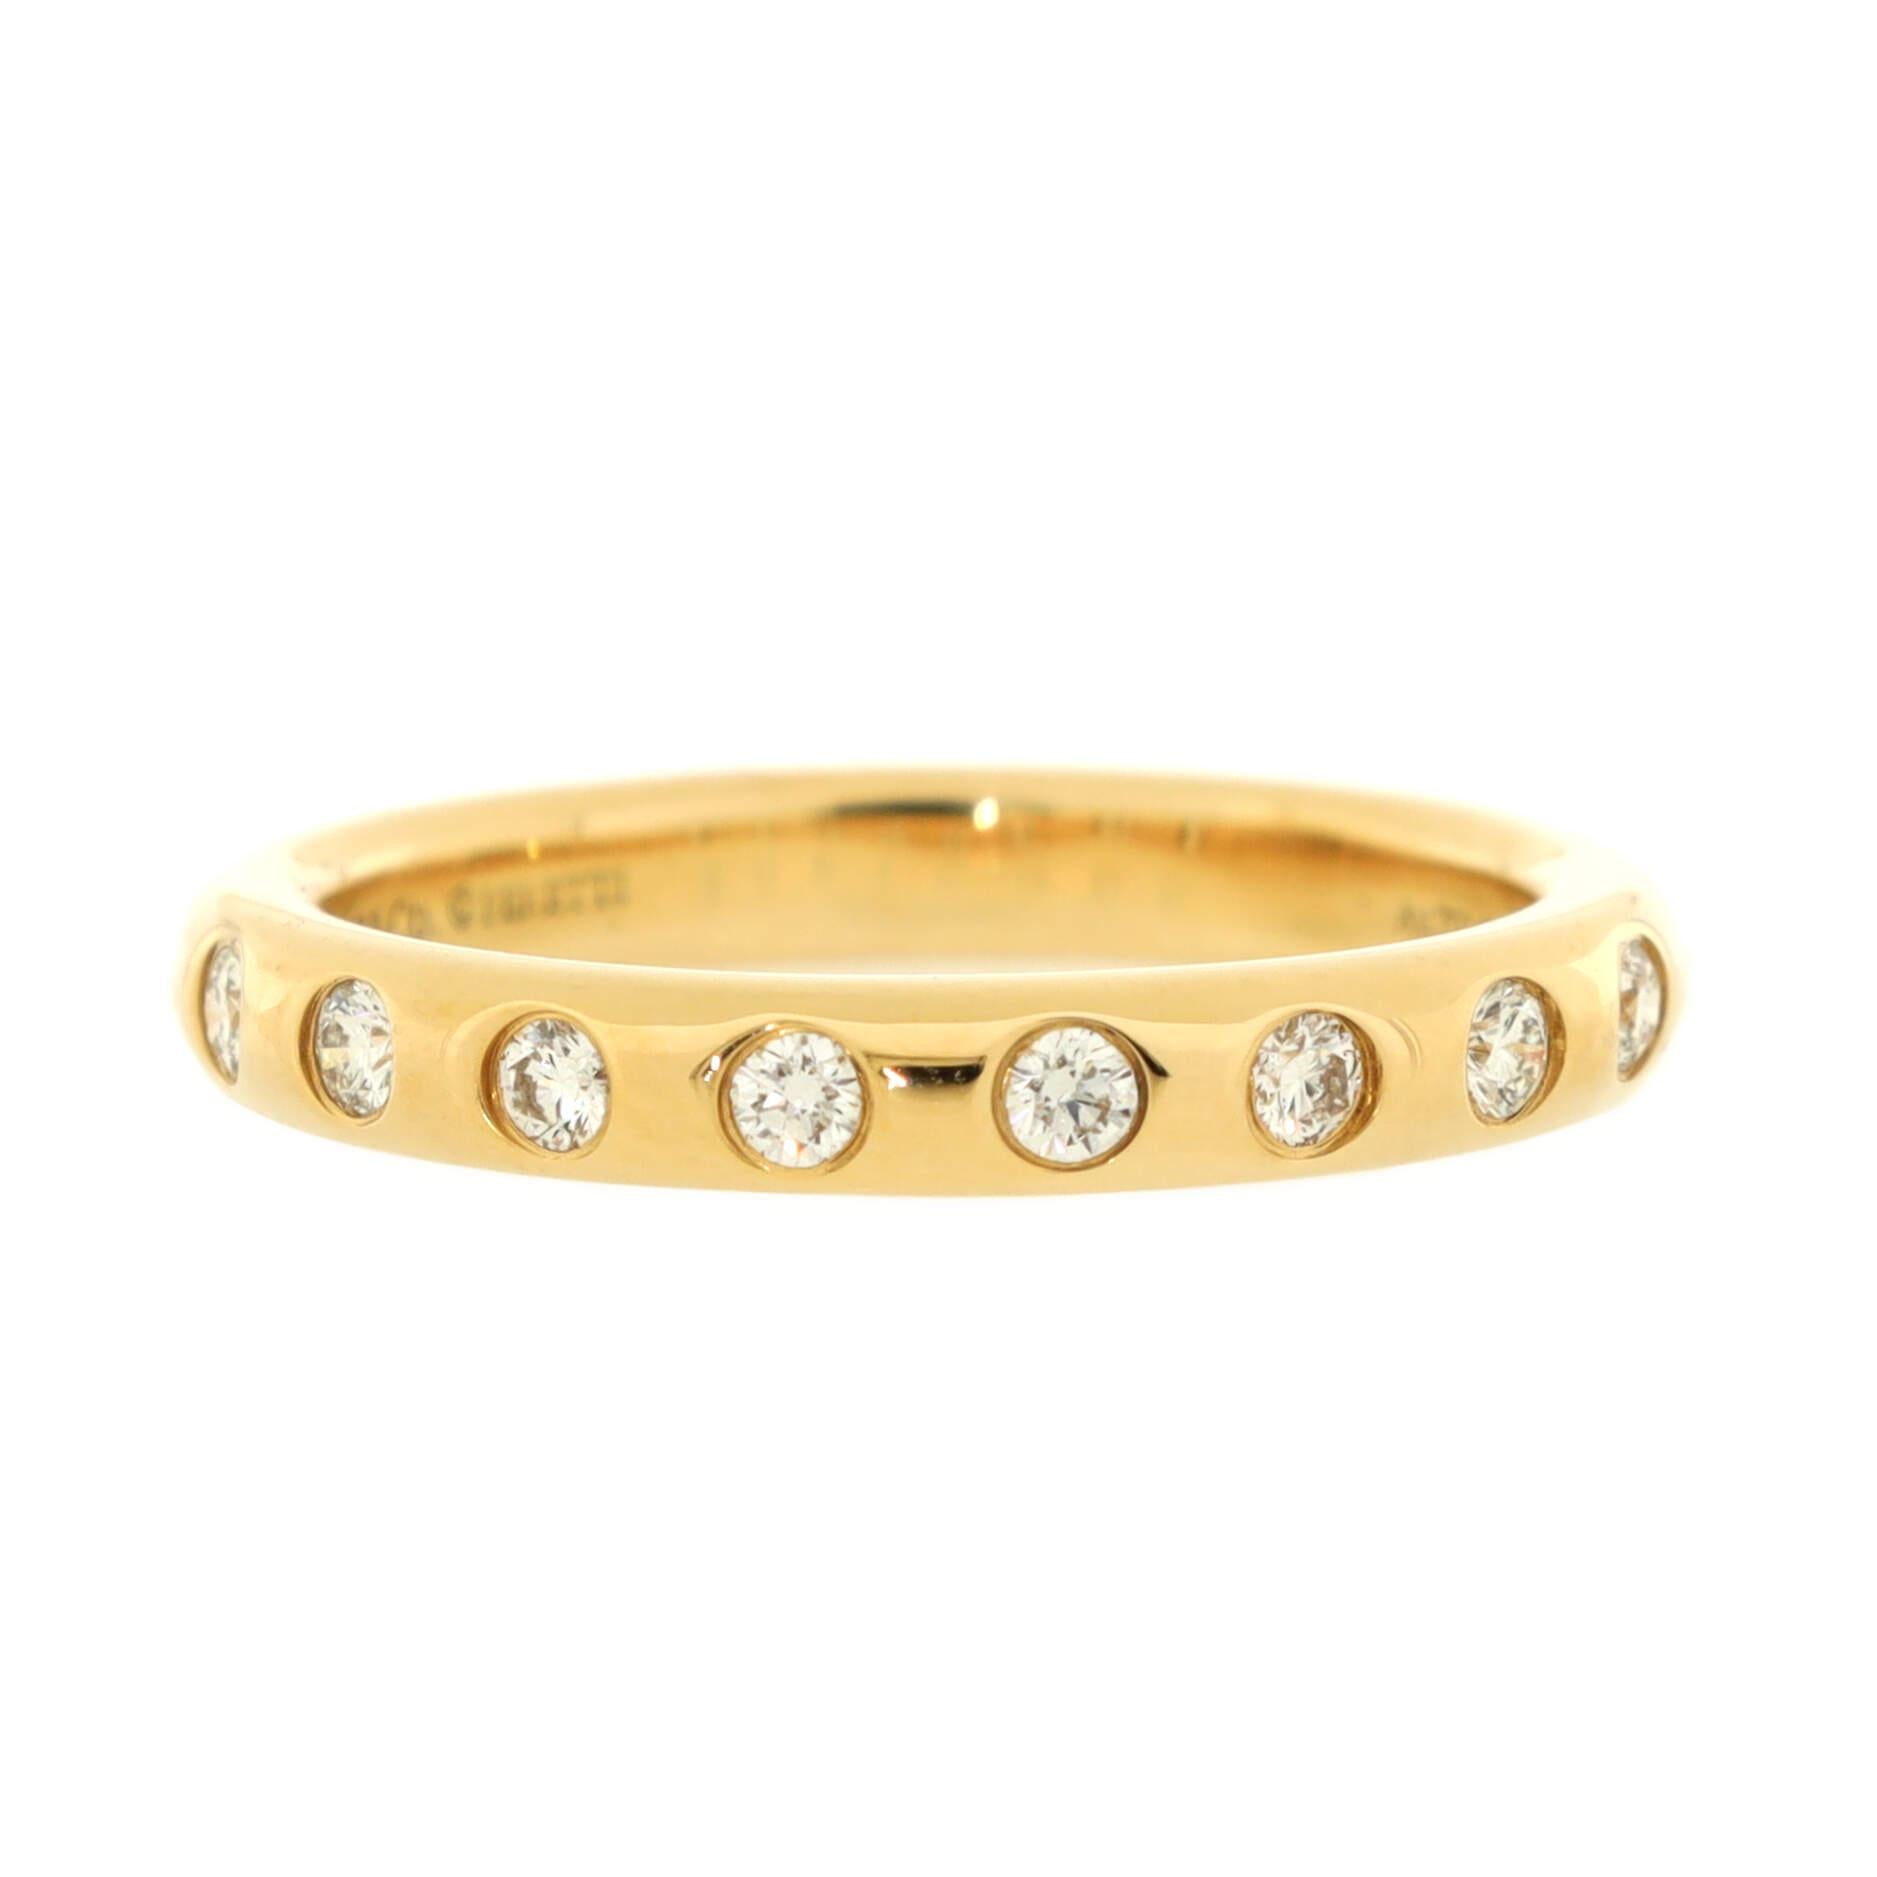 Condition: Great. Minor wear throughout.
Accessories: No Accessories
Measurements: Size: 5, Width: 2.75 mm
Designer: Tiffany & Co.
Model: Elsa Peretti 8 Diamond Stacking Band Ring 18K Yellow Gold with Diamonds
Exterior Color: Yellow Gold
Item